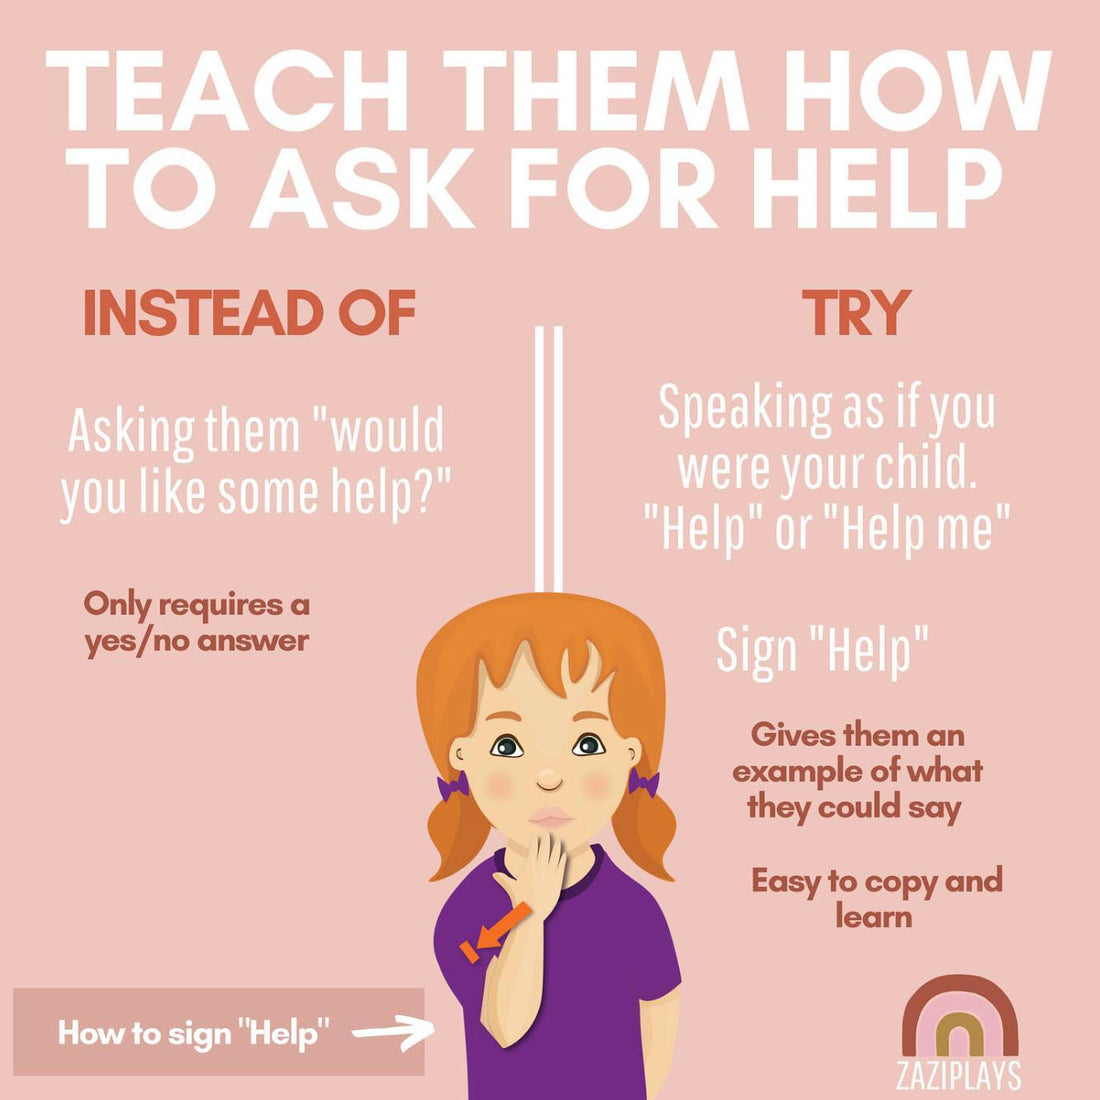 Teach them how to ask for help